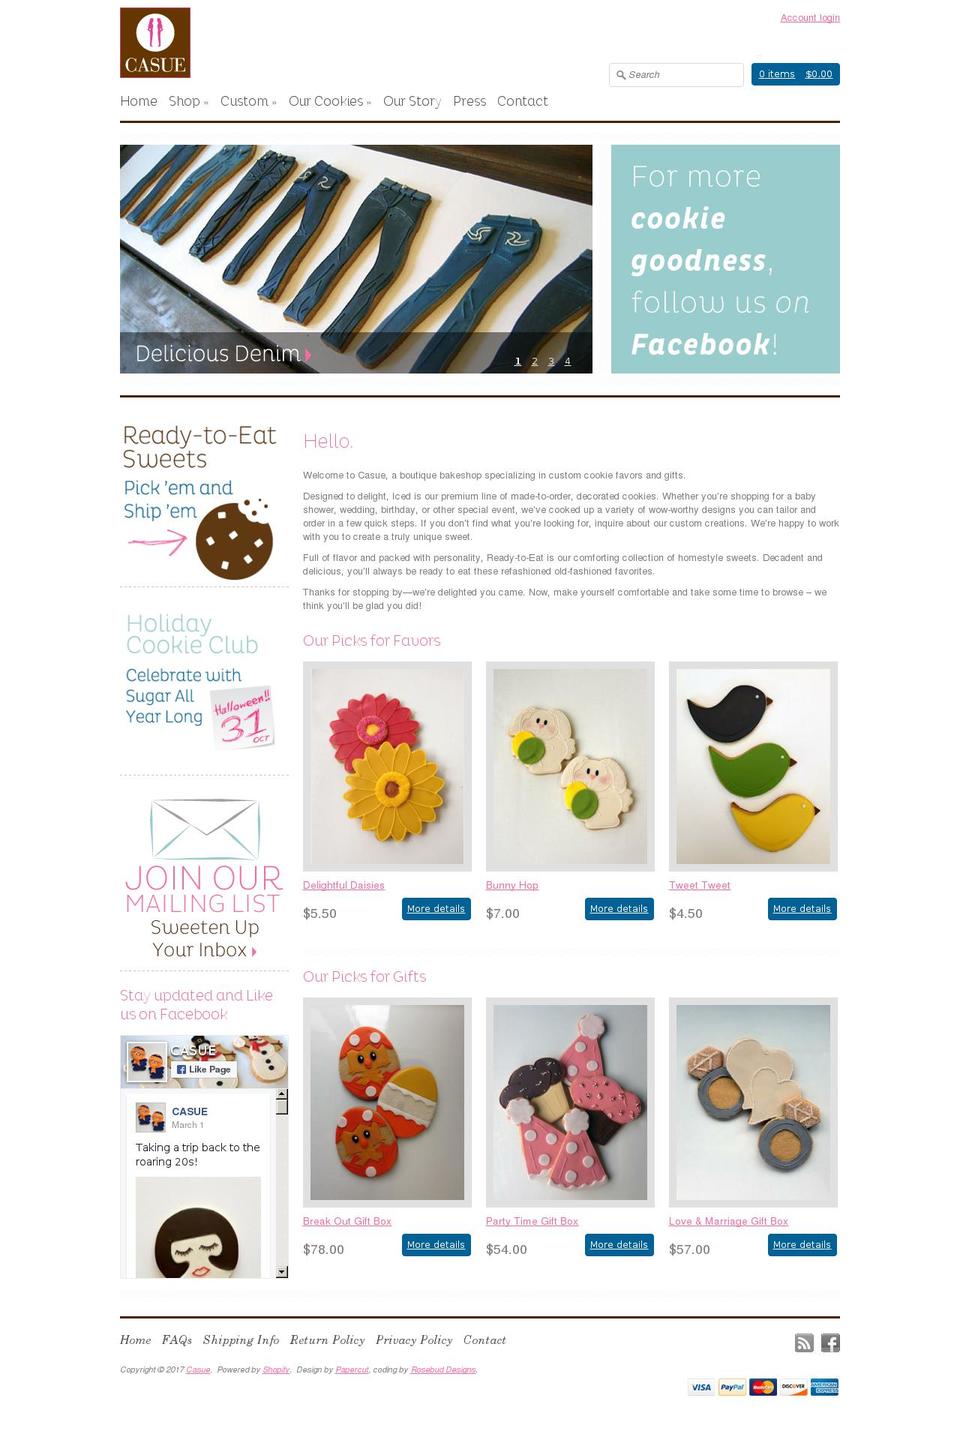 Expression Shopify theme site example casuesweets.com